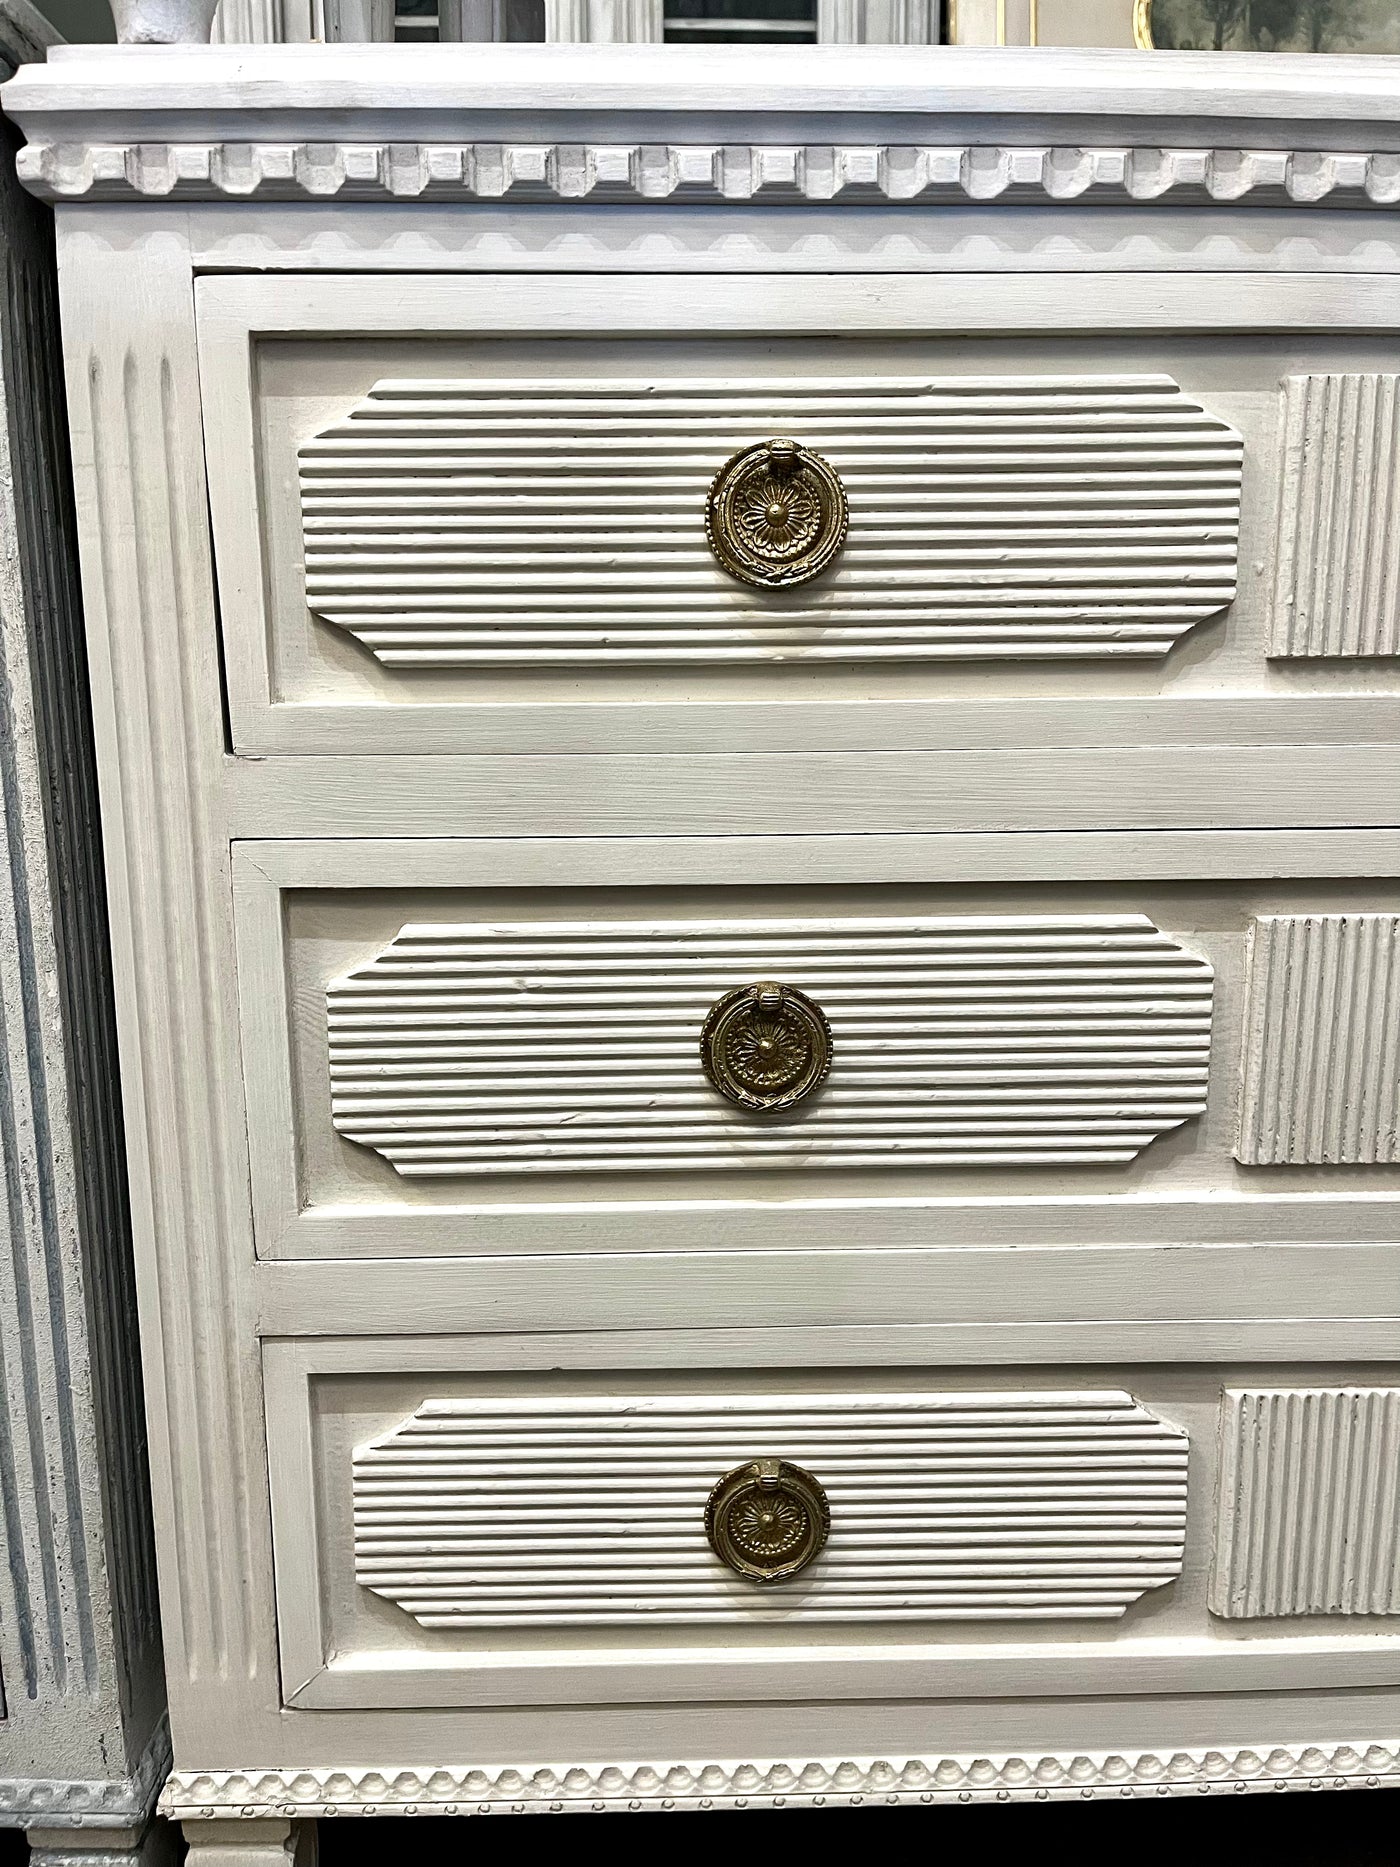 Reeded Swedish Chest